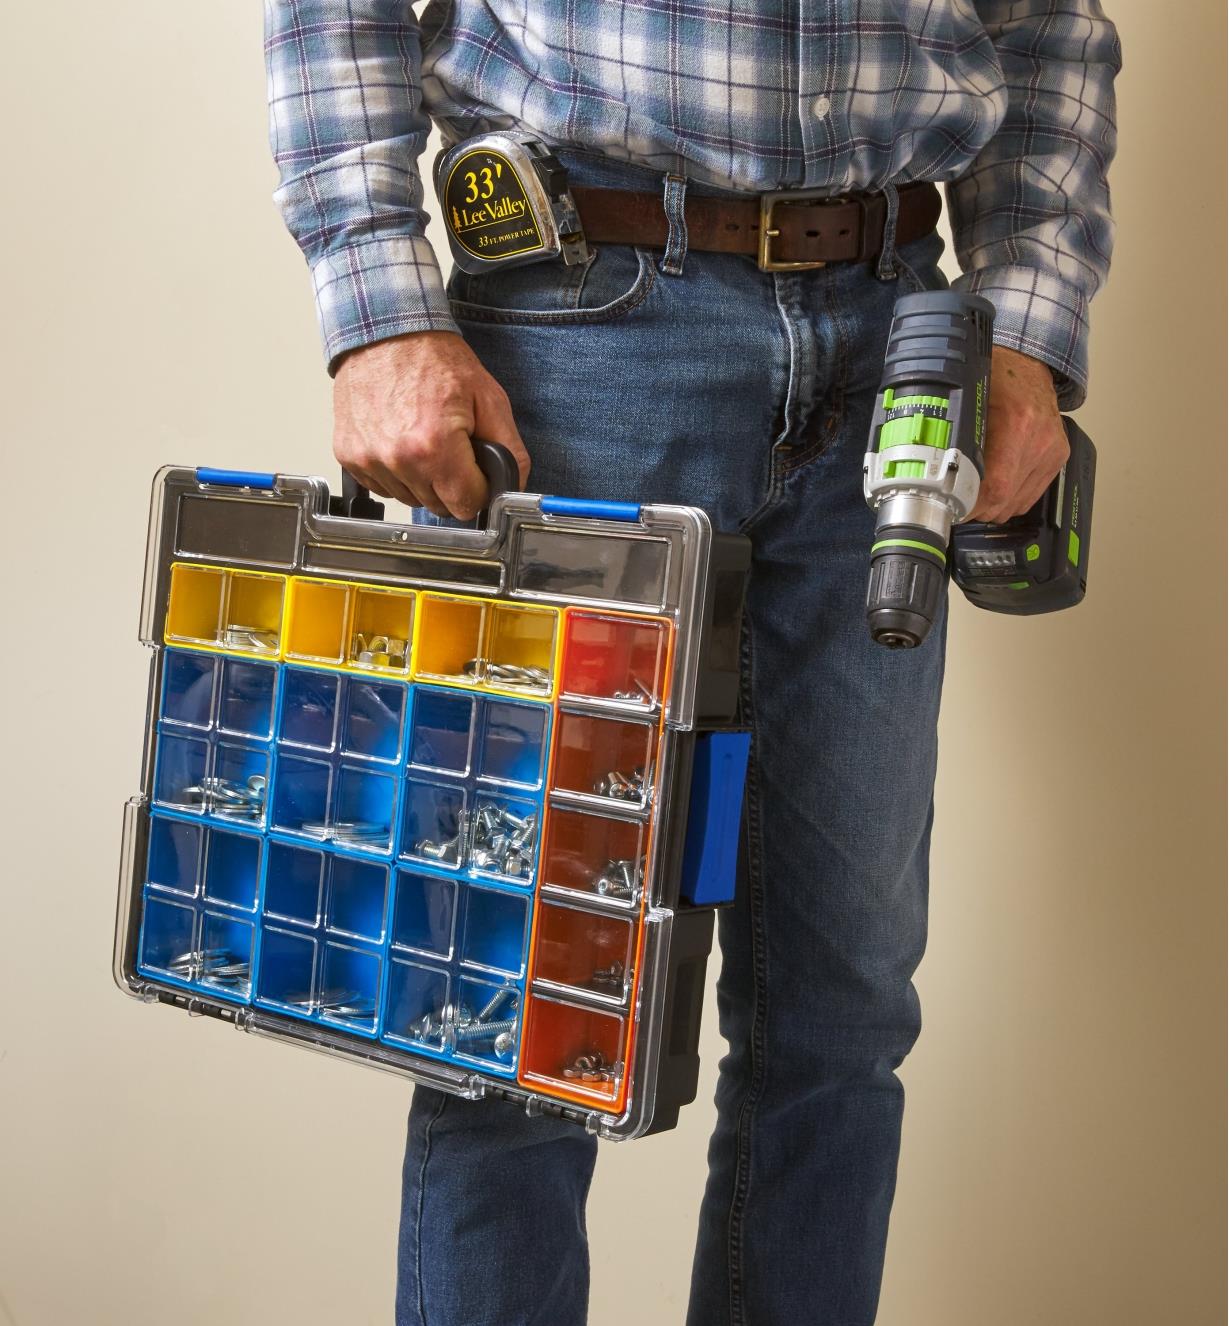 A man carries a drill and an Allit Pro 15-compartment case holding bins of nuts, bolts and washers